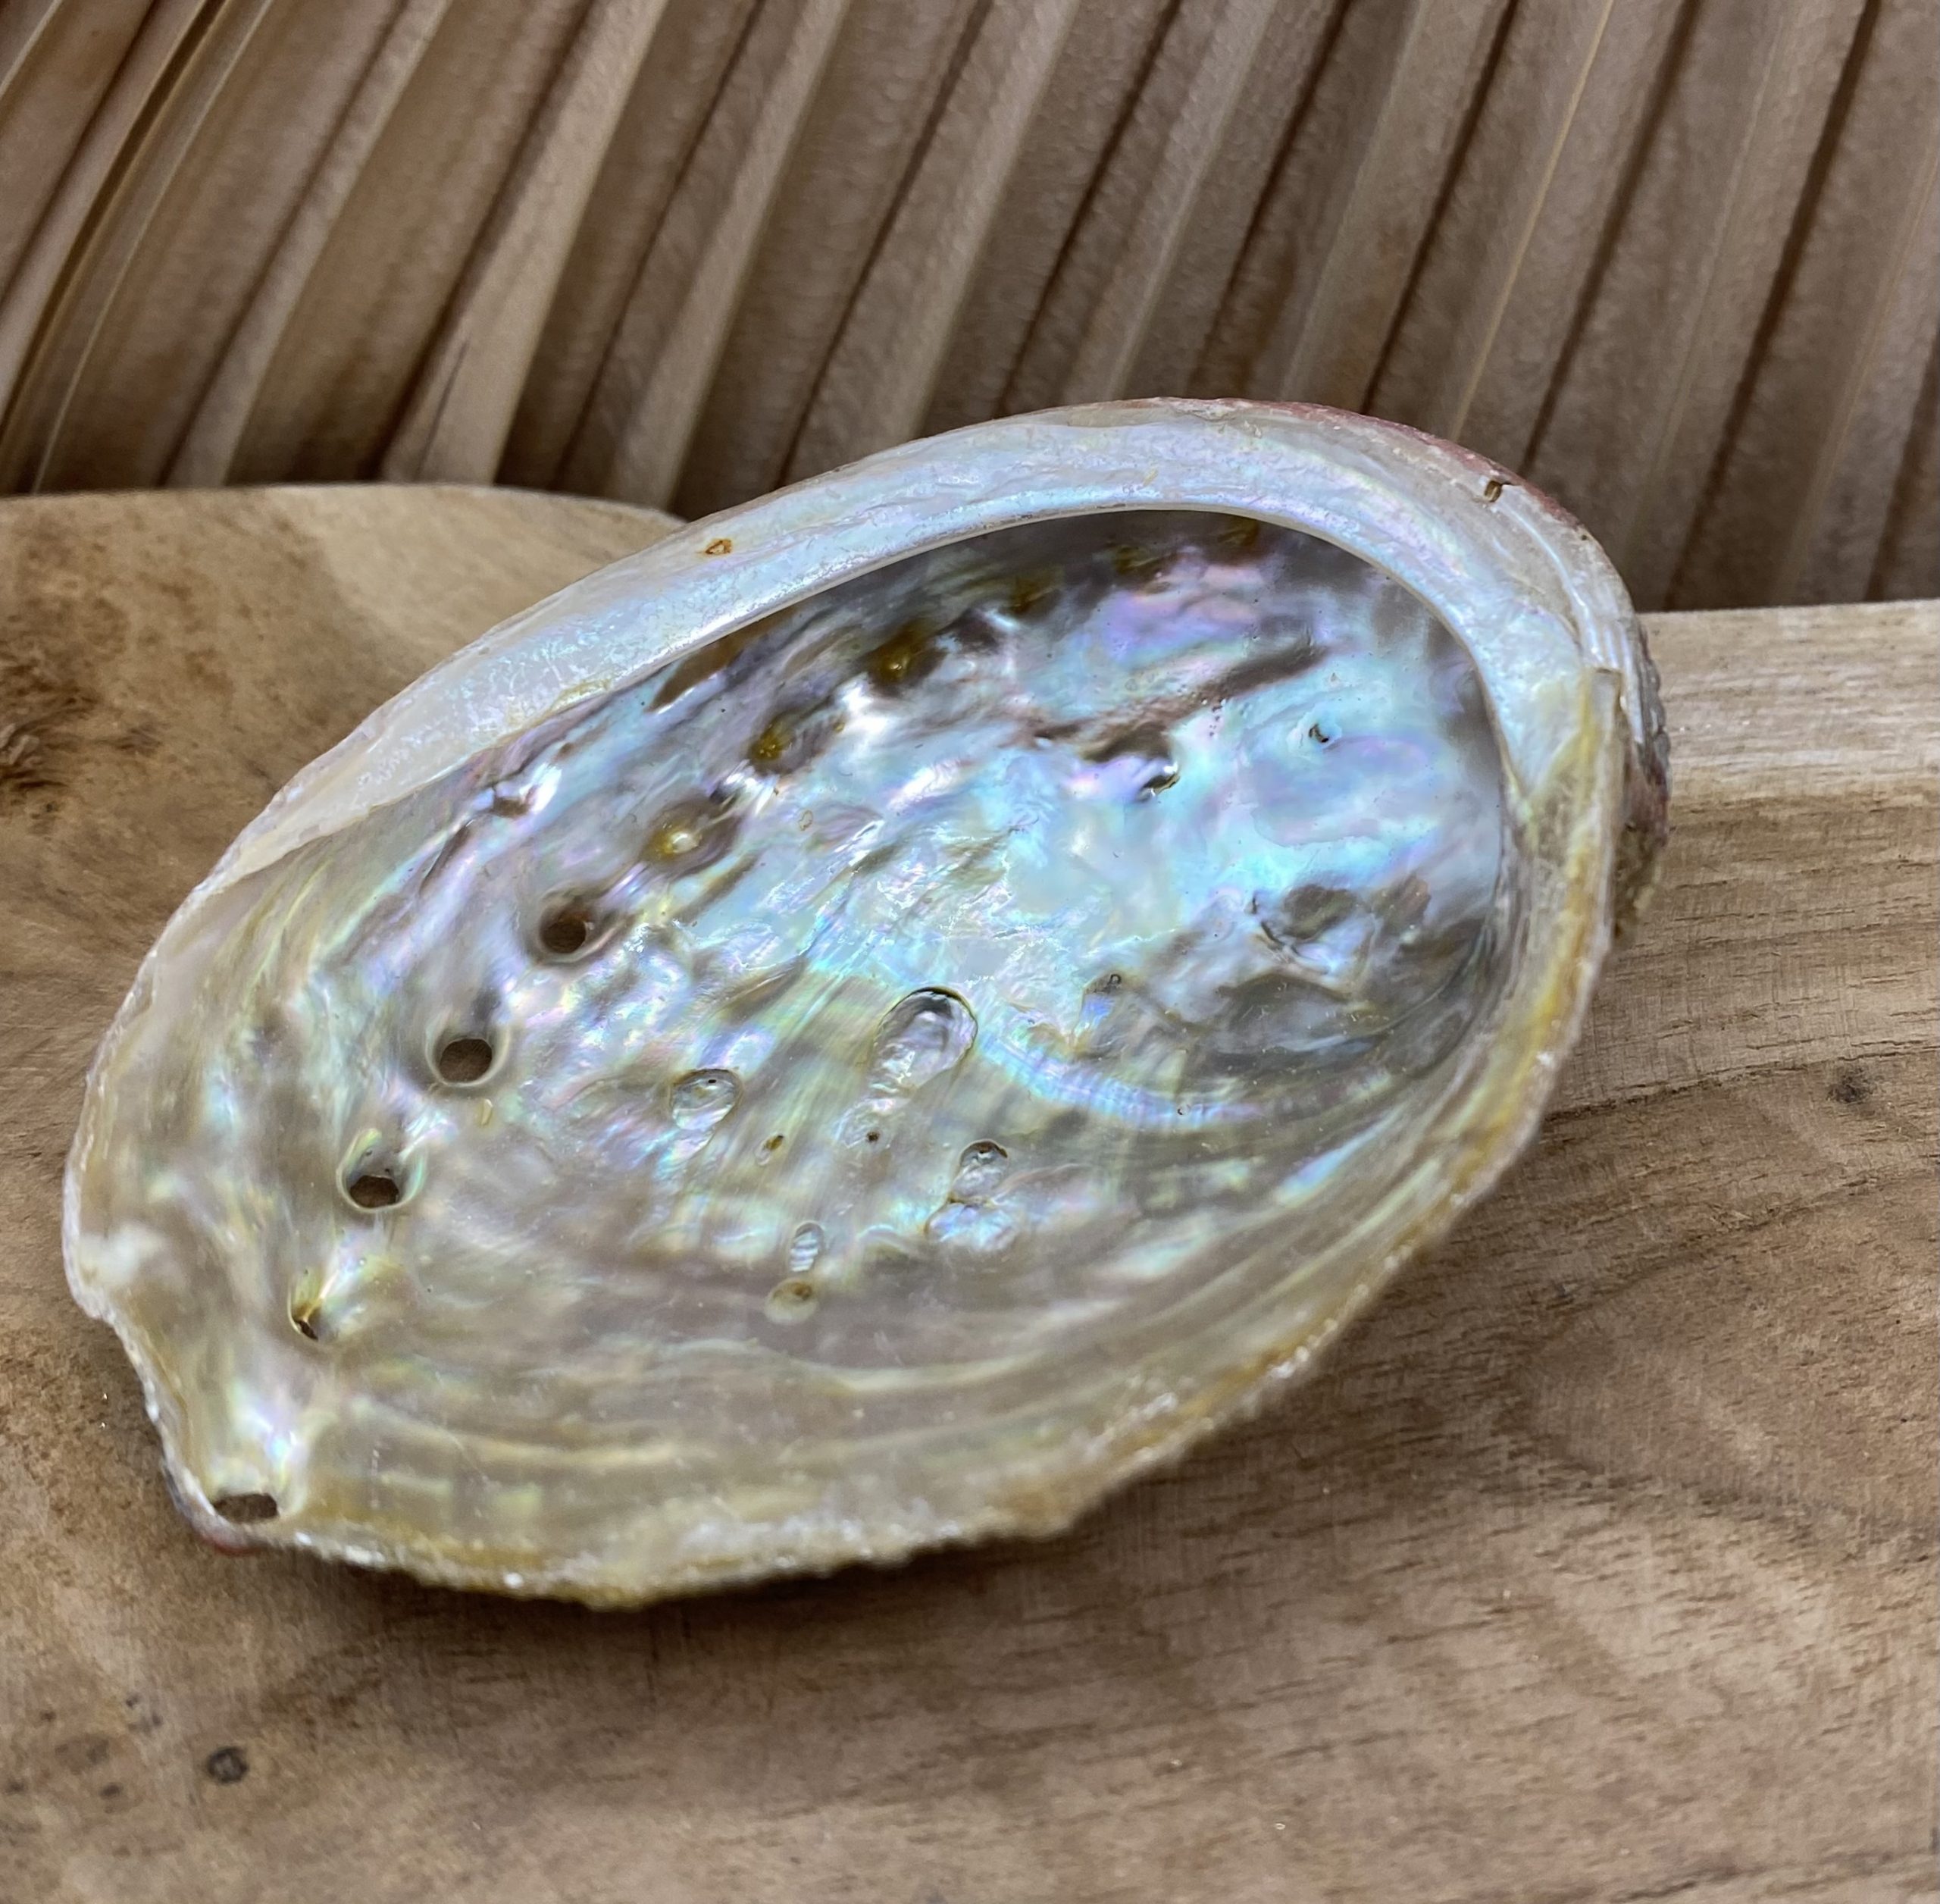 Abalone naturelle - Coquille d'Ormeau - Herboristerie du Valmont